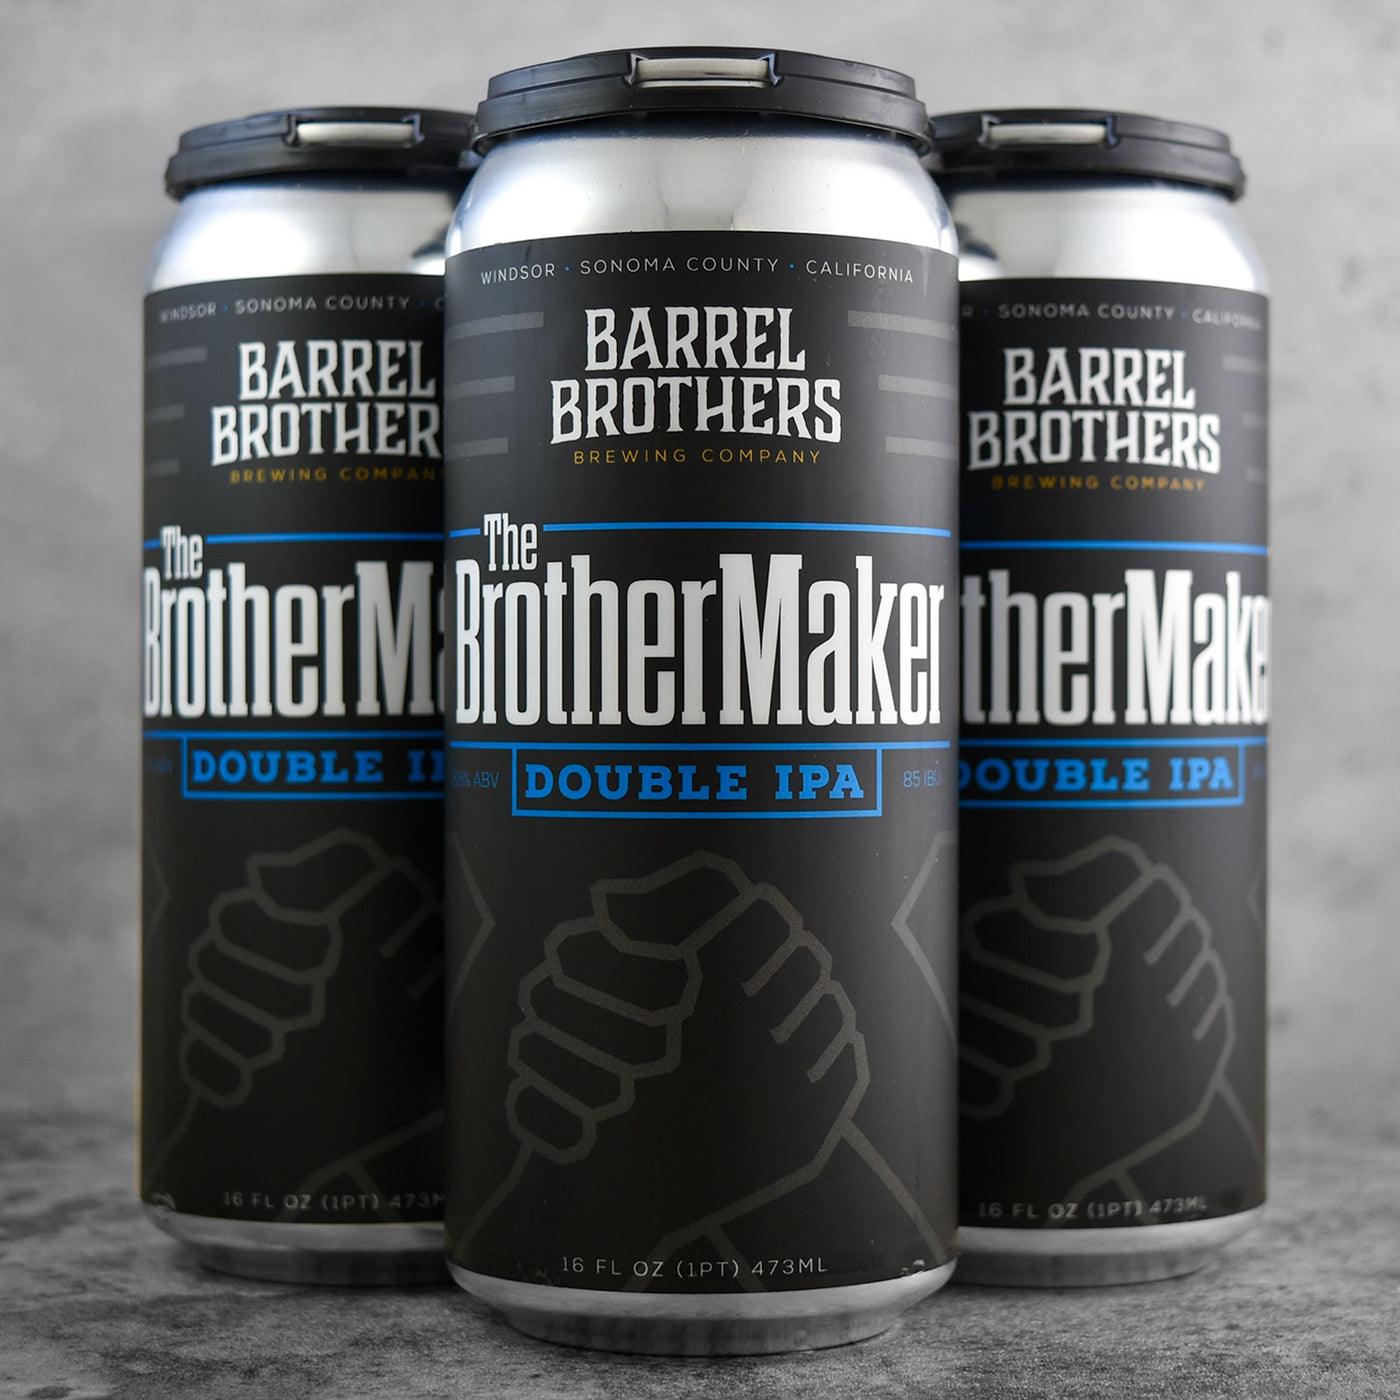 Barrel Brothers The BrotherMaker